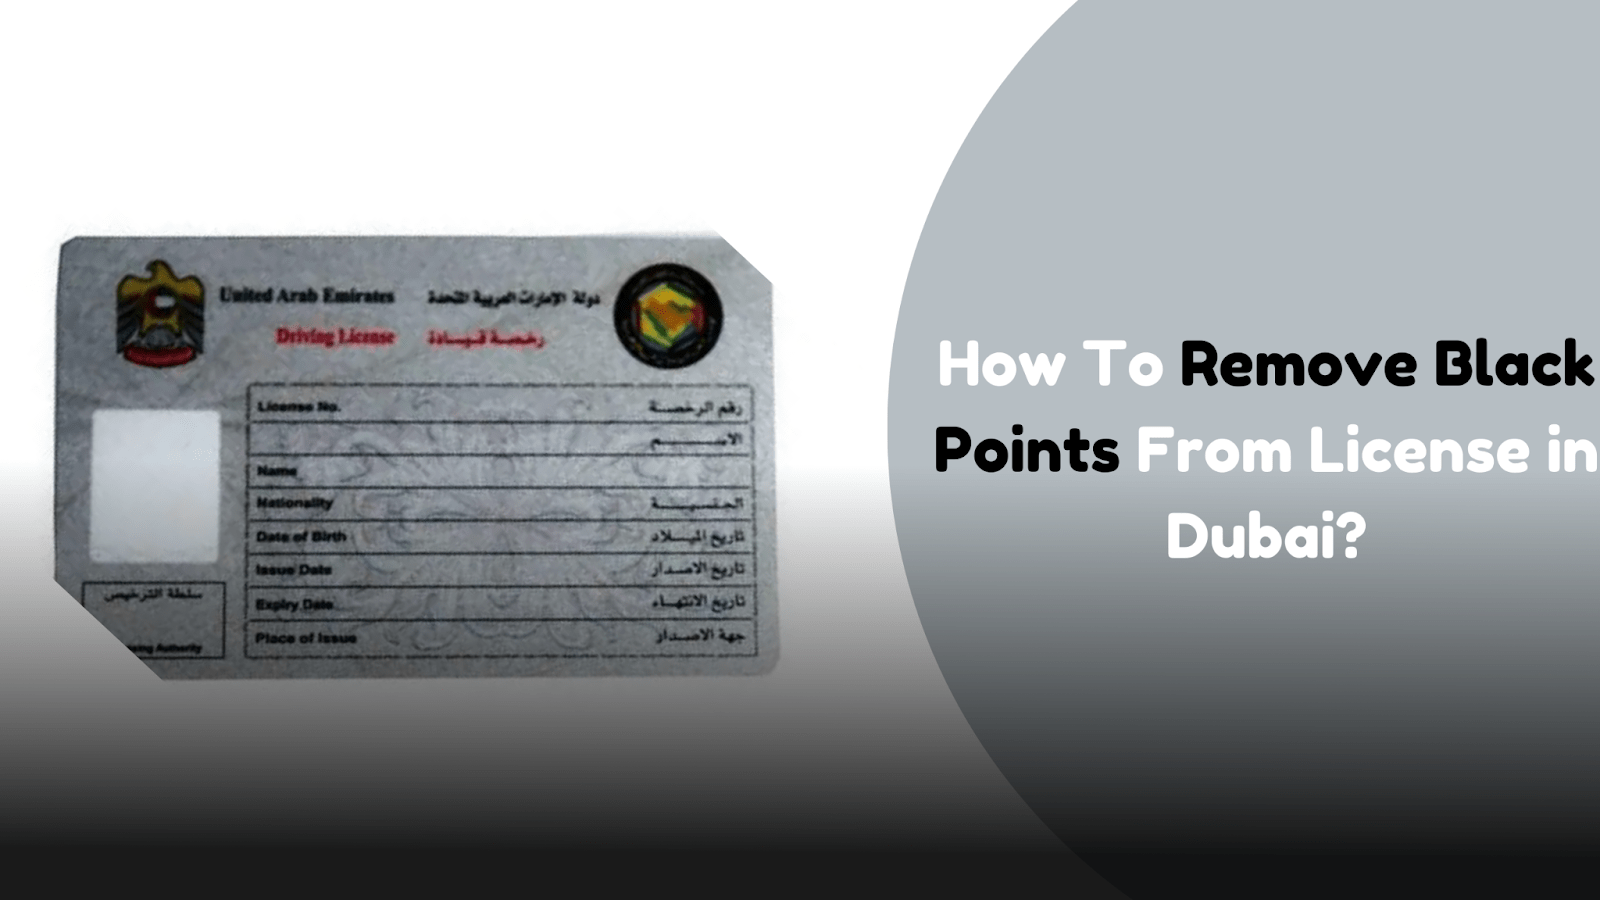 How To Remove Black Points From License in Dubai